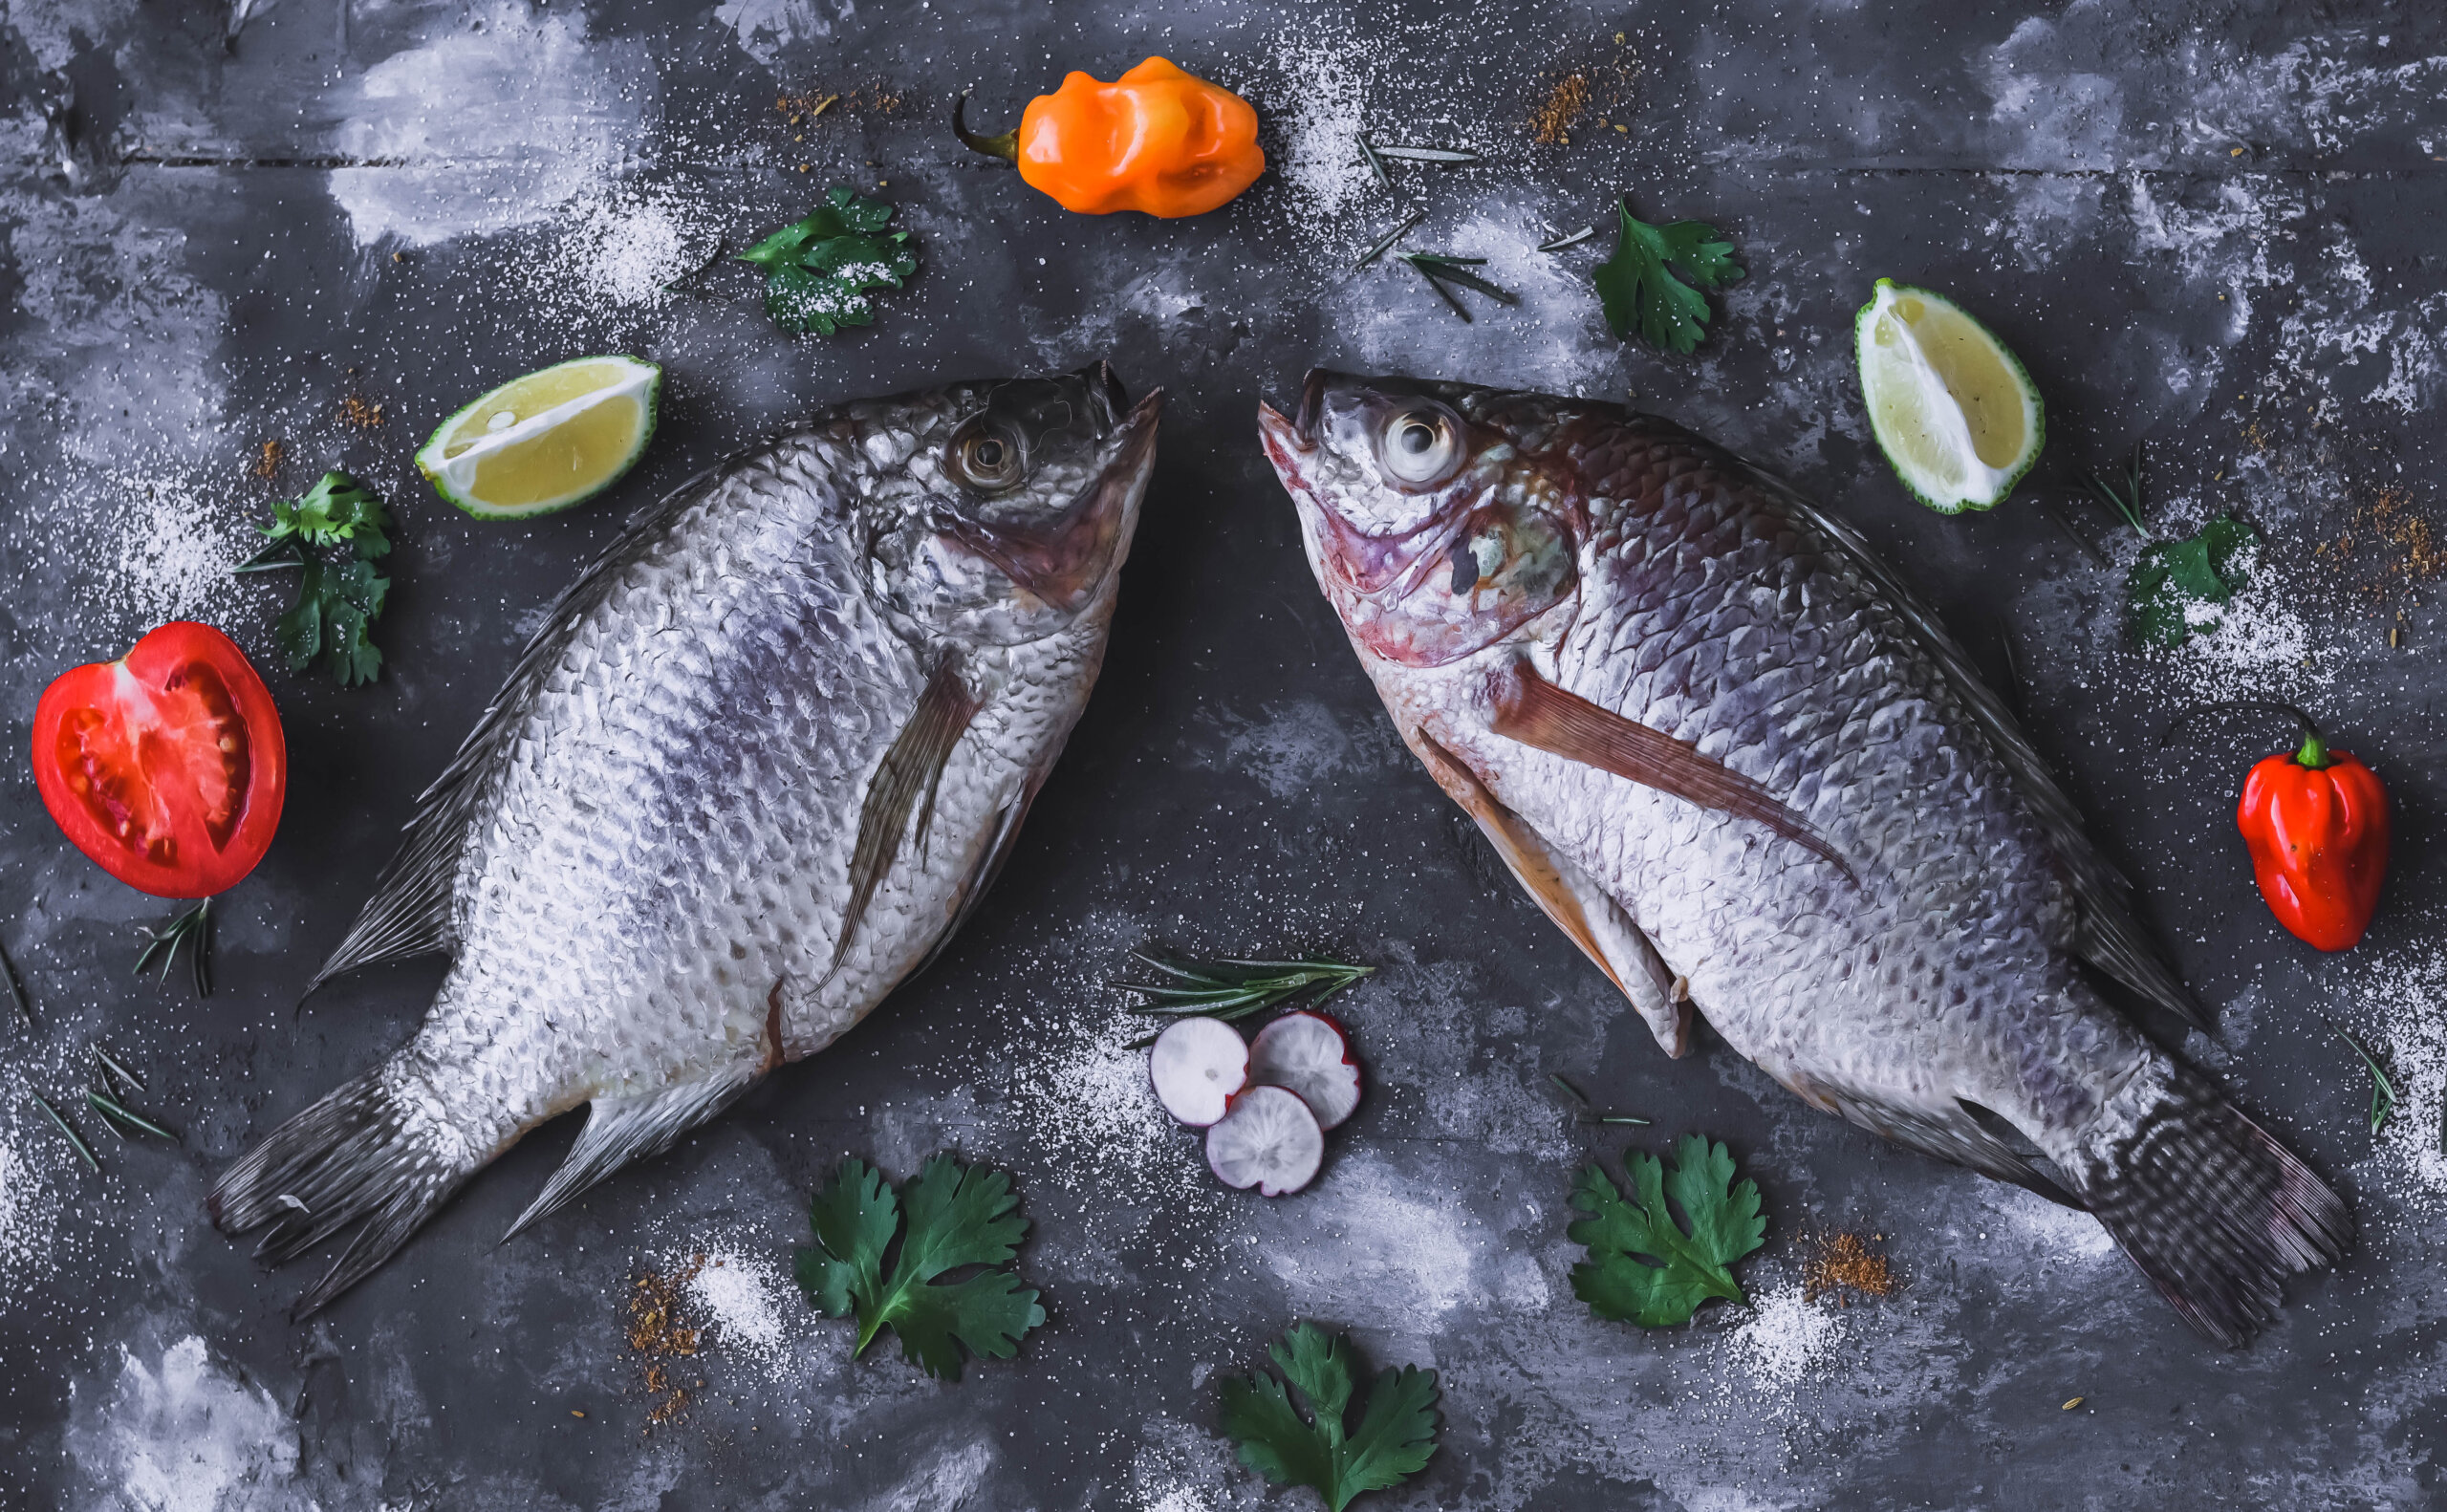 How to Style & Photograph Raw Fish